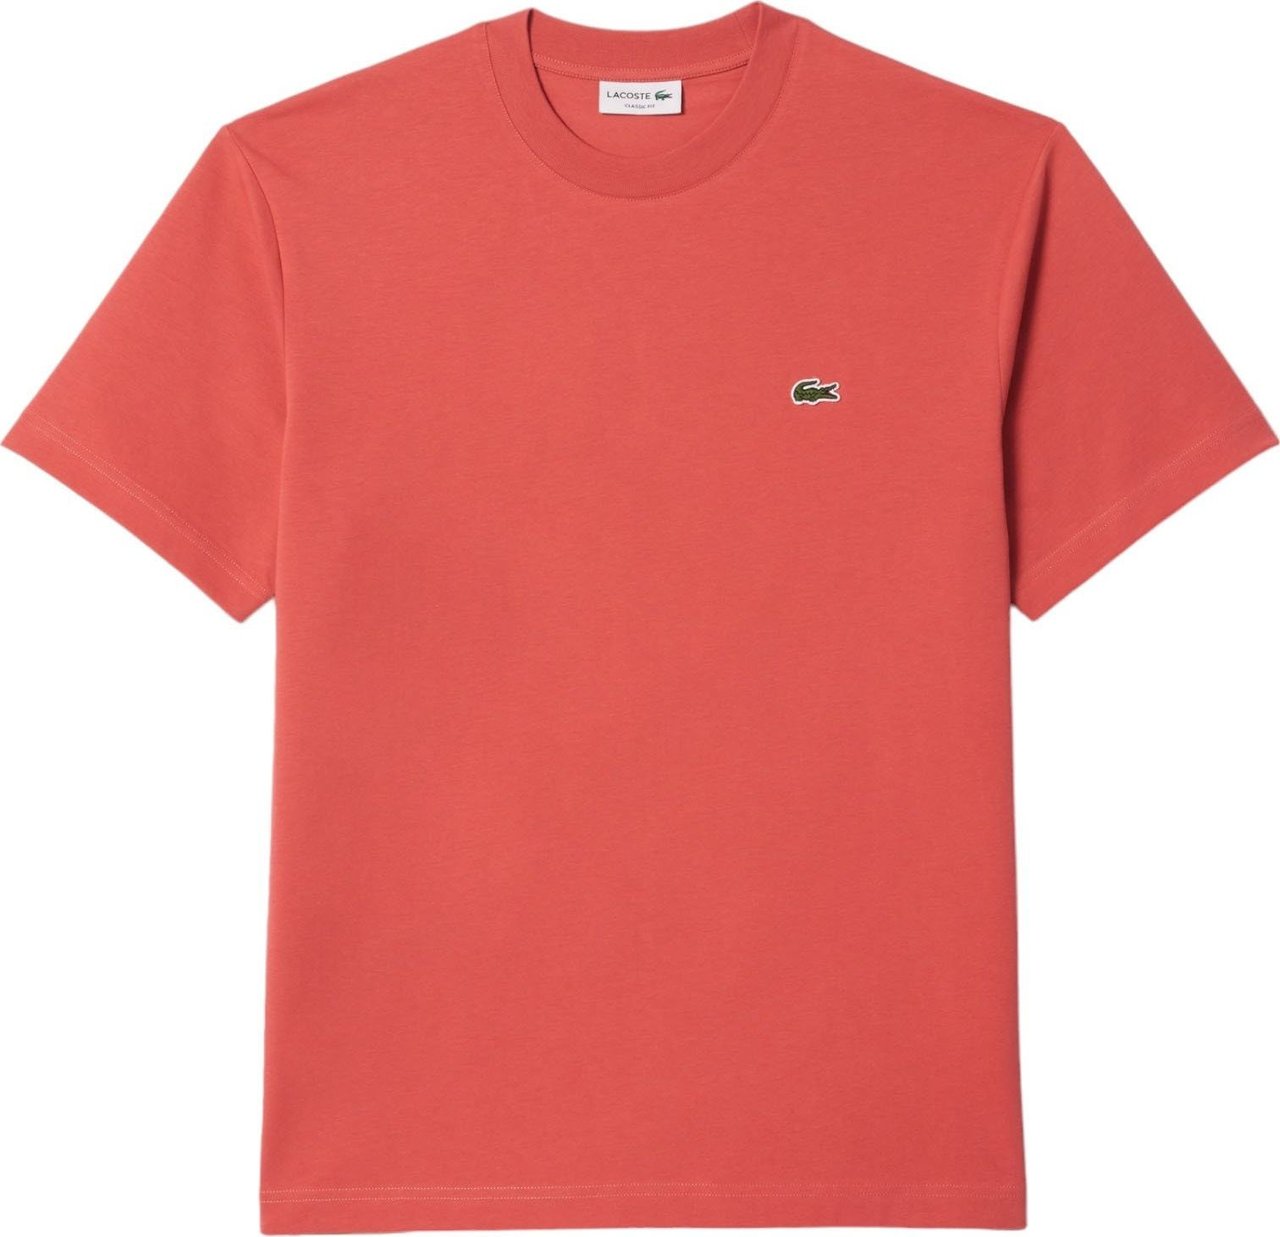 Lacoste Lacoste Heren T-shirt Rood TH7318/ZV9 Rood